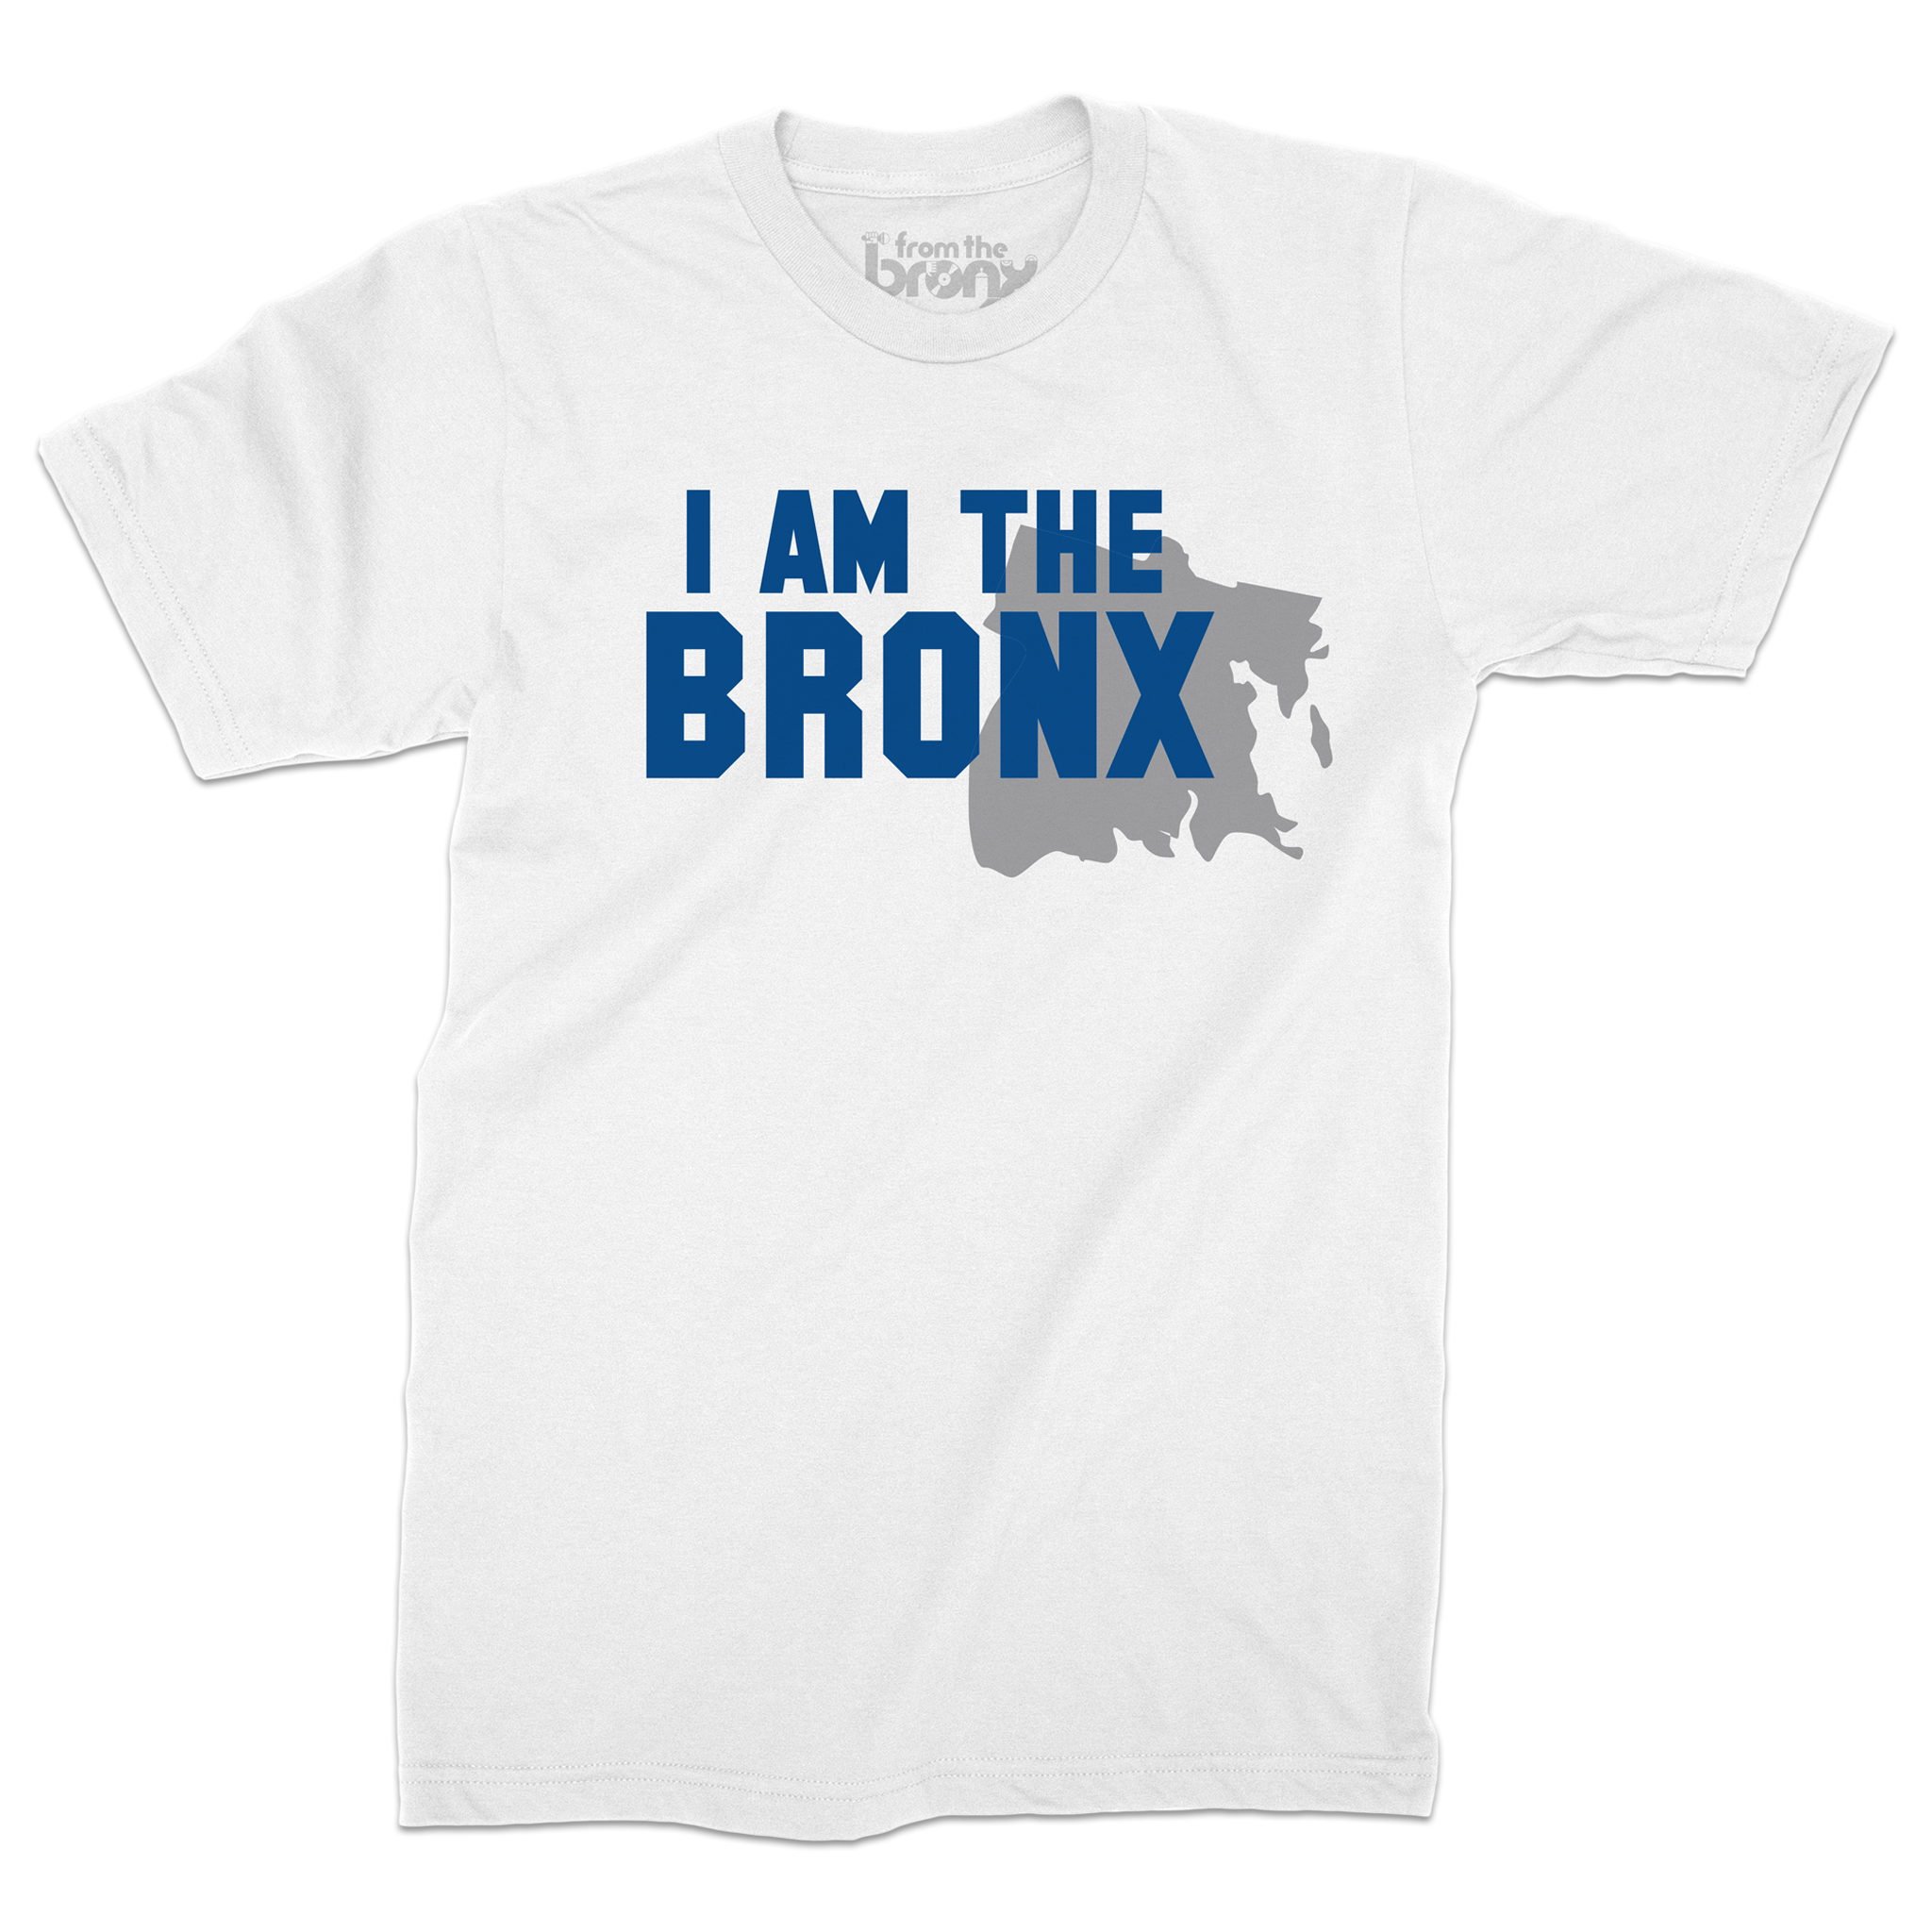 I AM THE BRONX T-Shirt Front in White